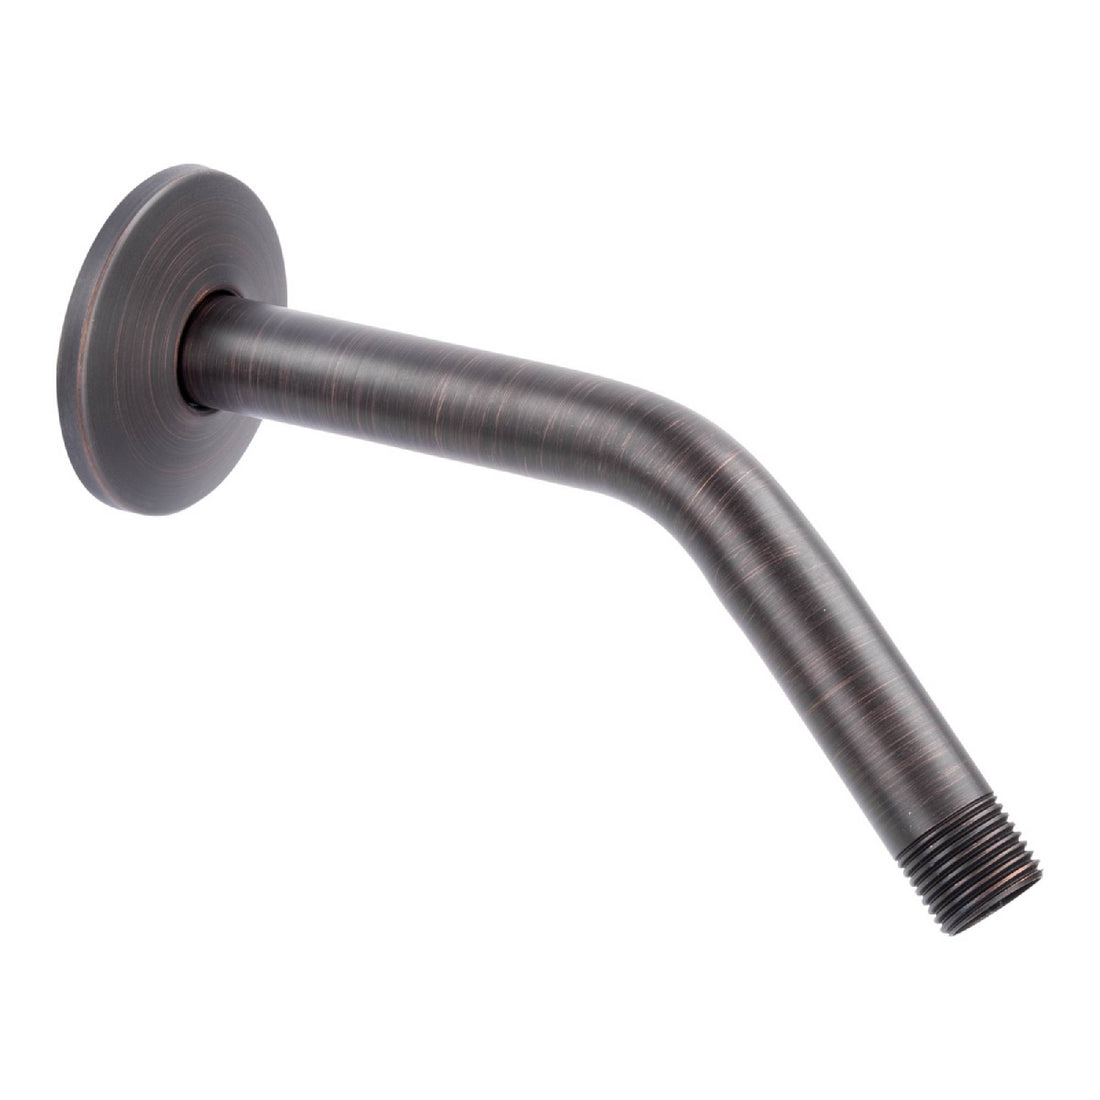 8 in. Stainless Steel Shower Head Extension Arm with Flange (Oil-Rubbed Bronze Finish) - Utility sinks vanites Tehila